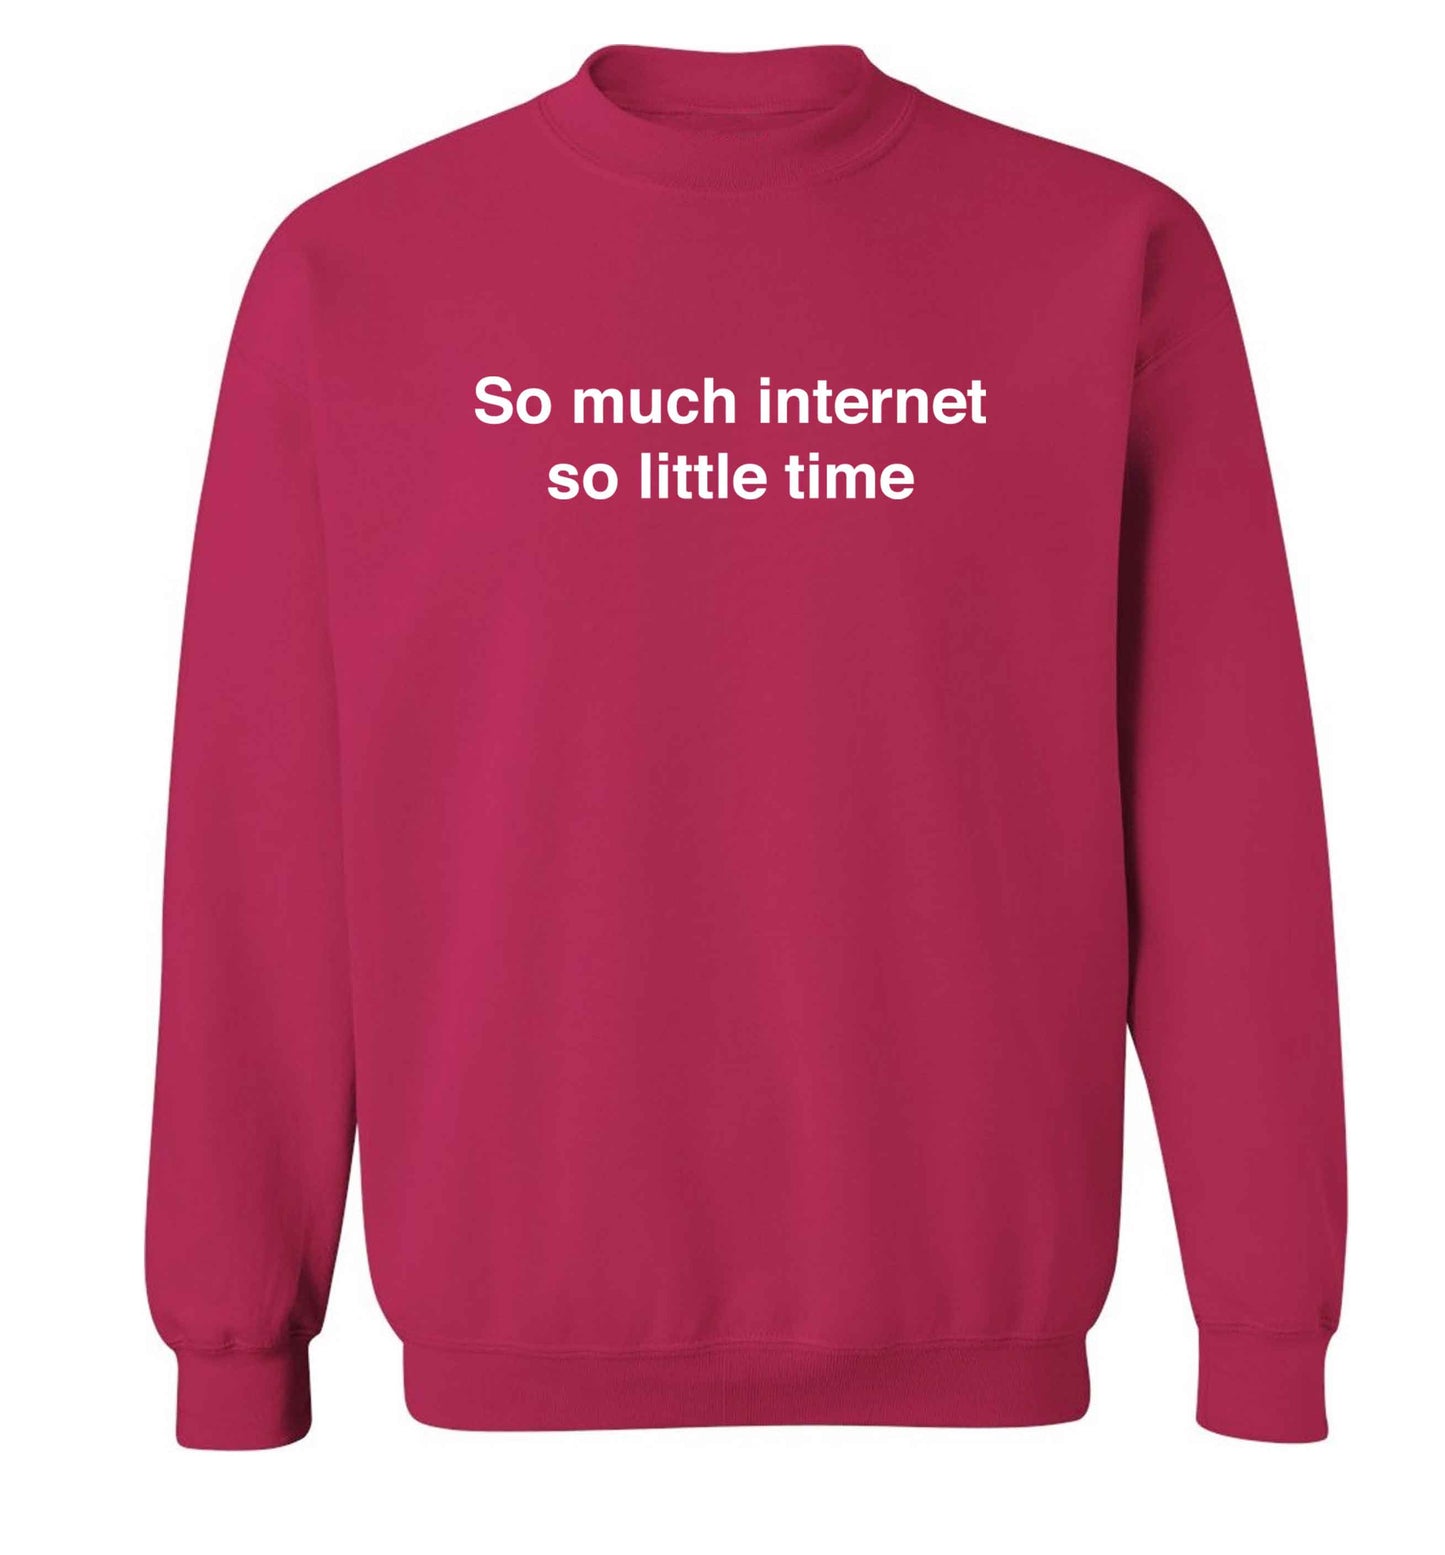 So much internet so little time adult's unisex pink sweater 2XL